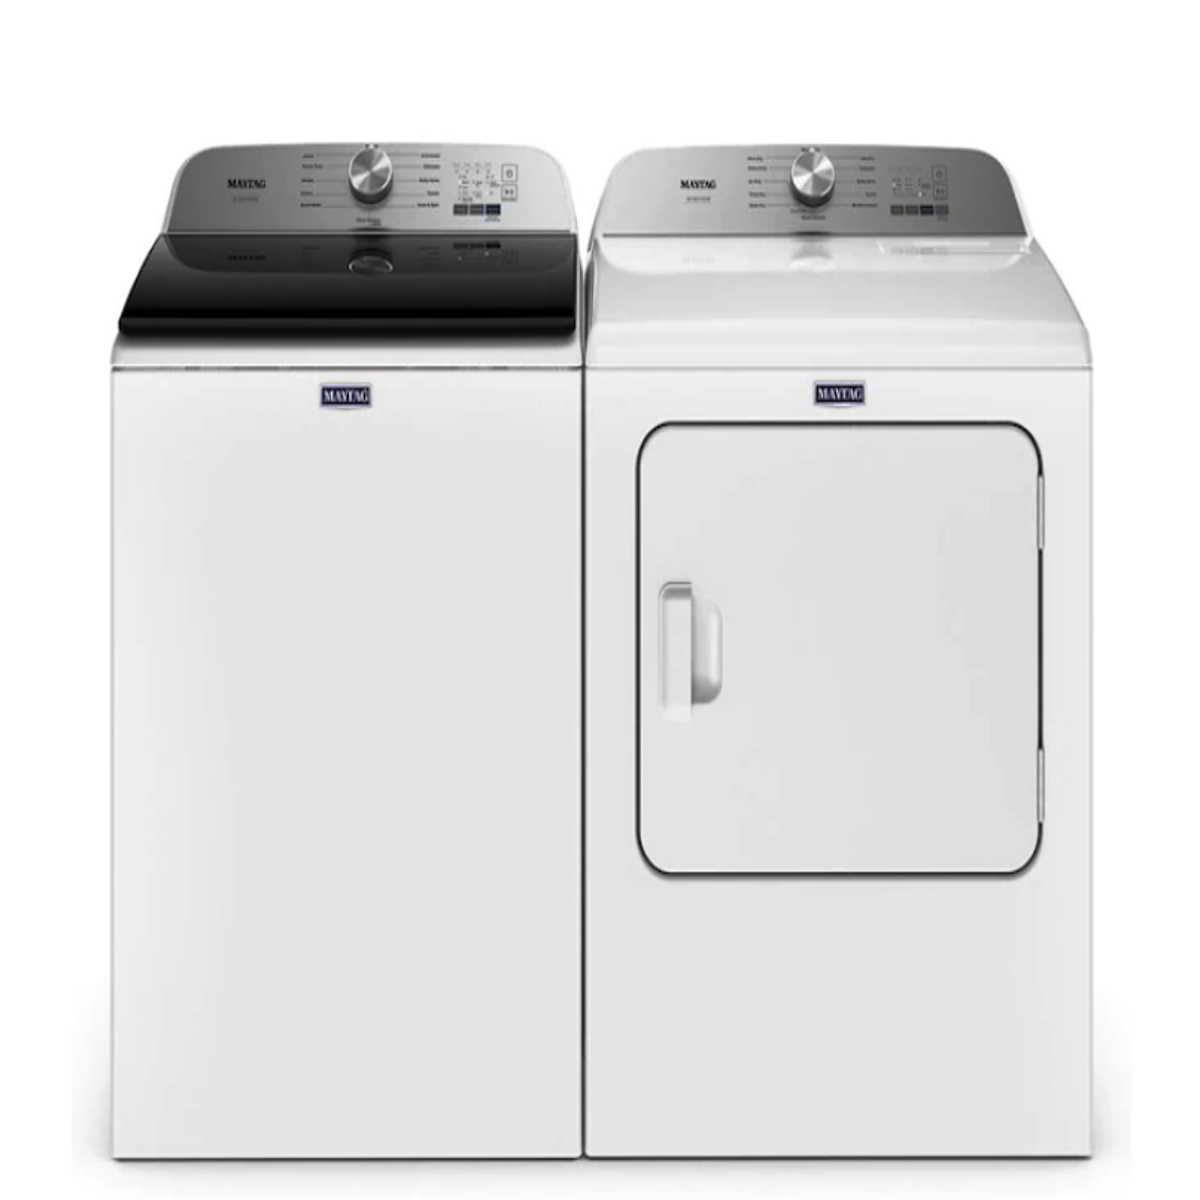 Maytag washer problems spin cycle